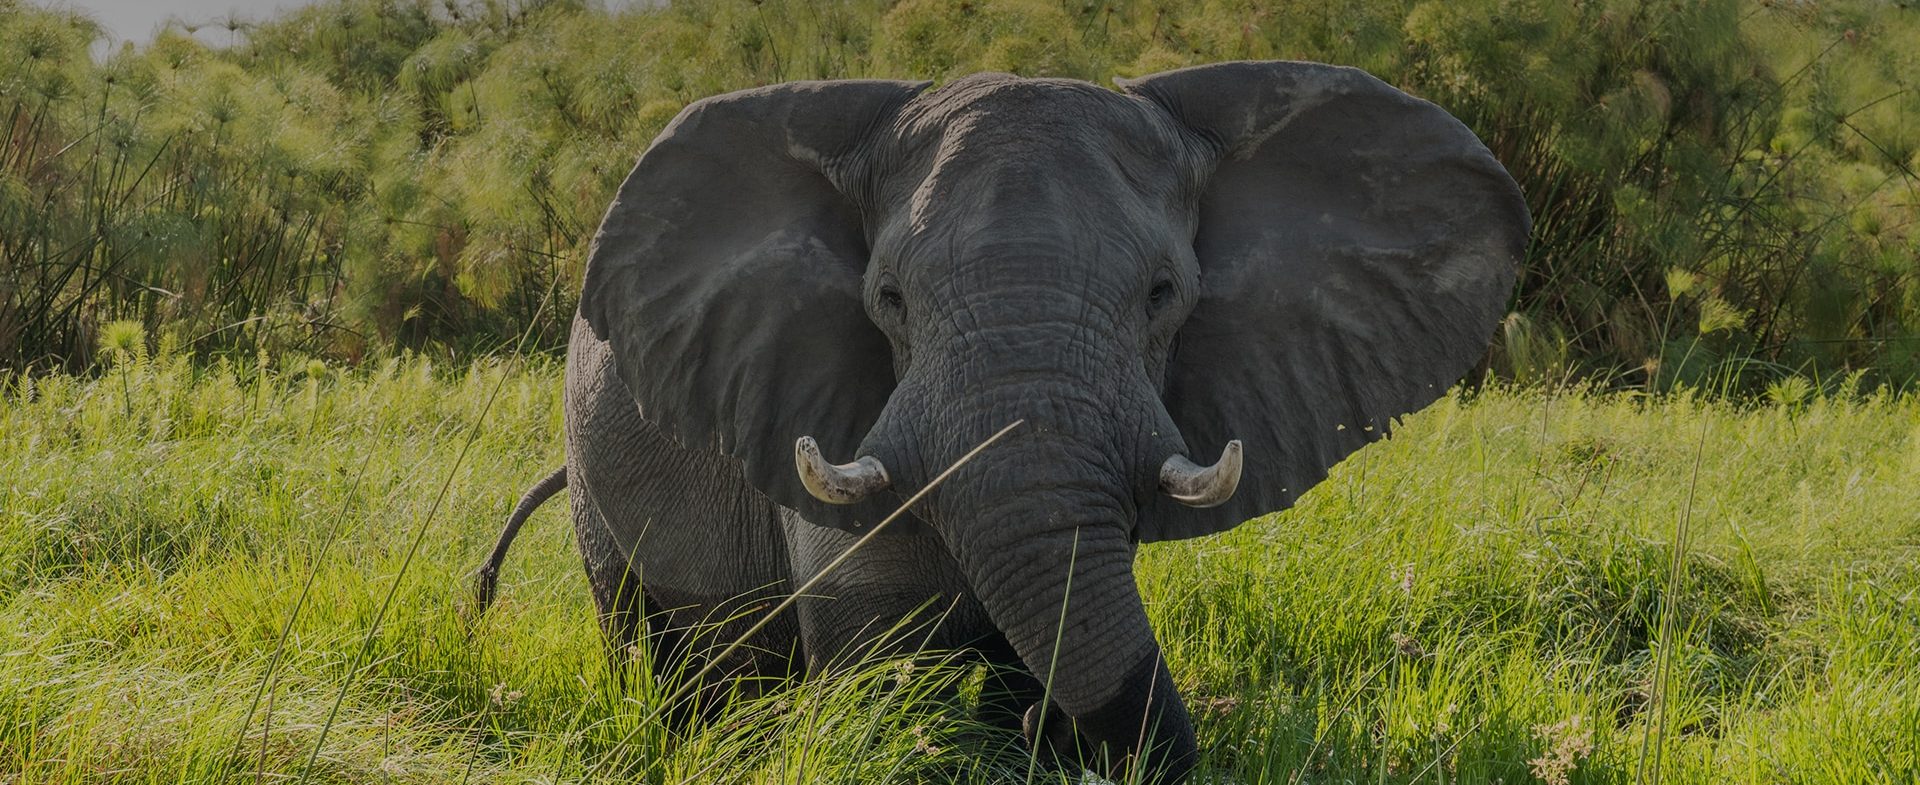 An African elephant stands in a grassy field, facing the camera with its large ears spread wide and tusks prominently displayed. Tall green grass and dense shrubs form the background under a clear sky during